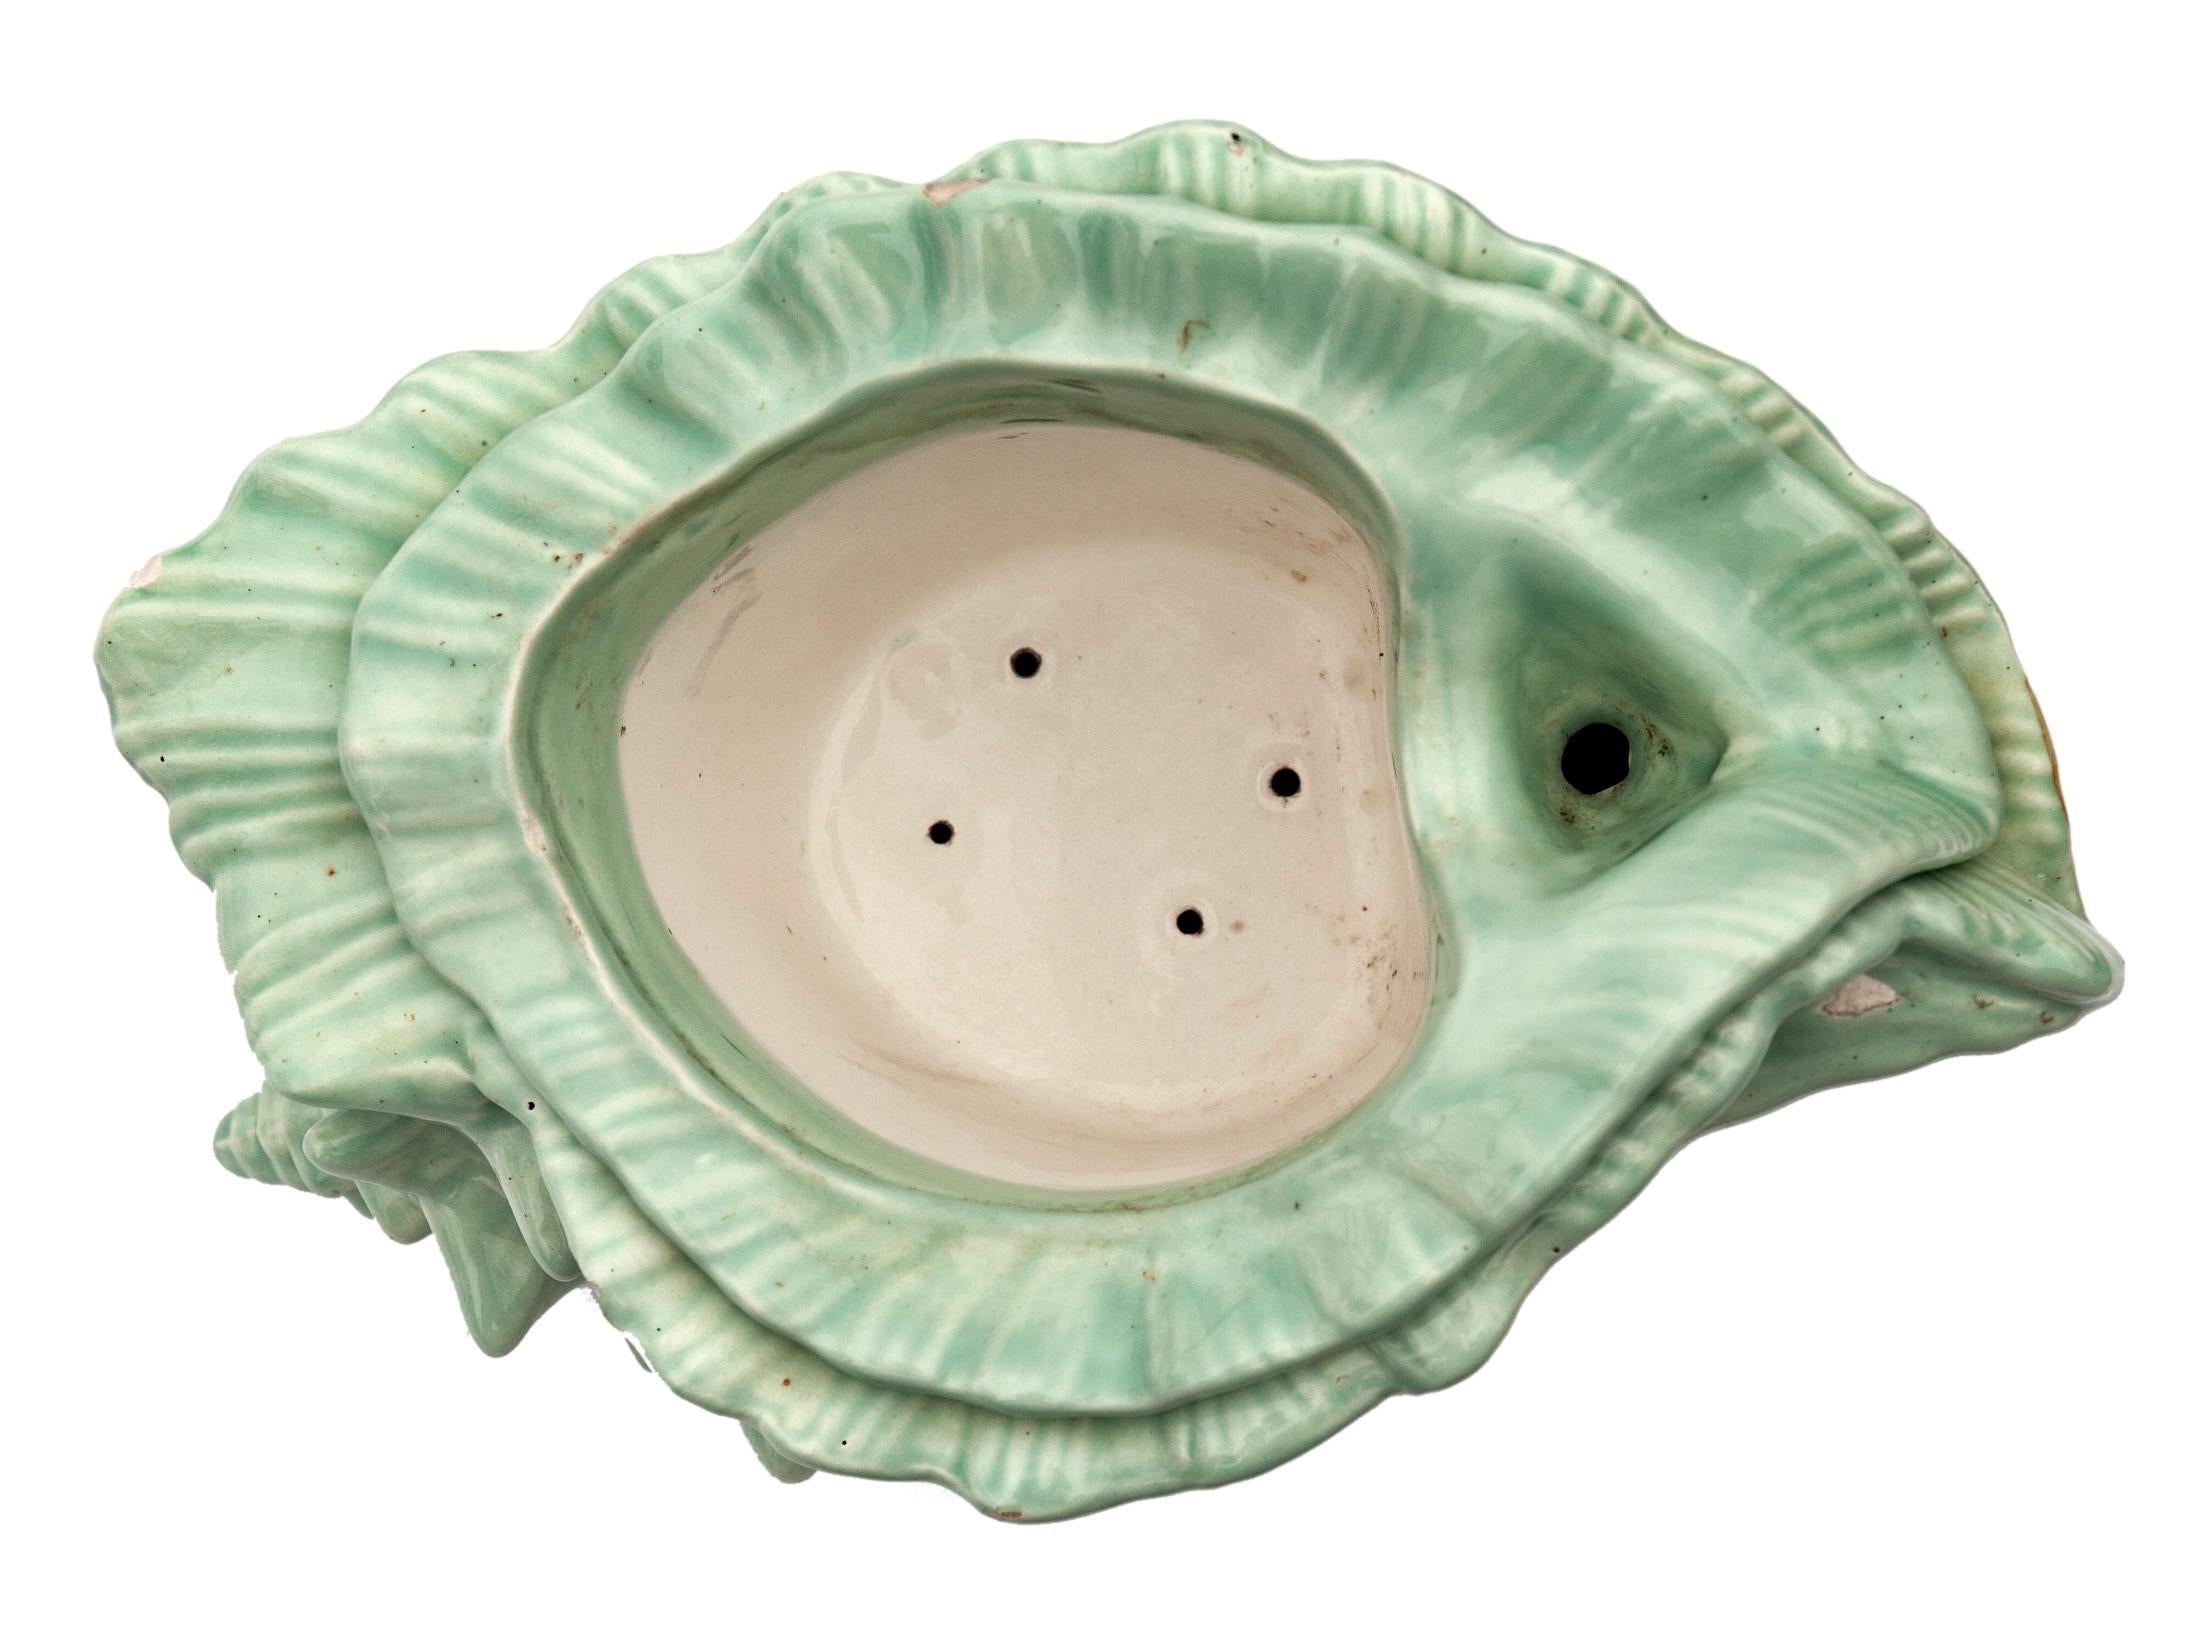 Glazed ceramic conch shell planter with self-draining interior pot.
Muted green surface inner planter in ivory.
Minor negligible chips.